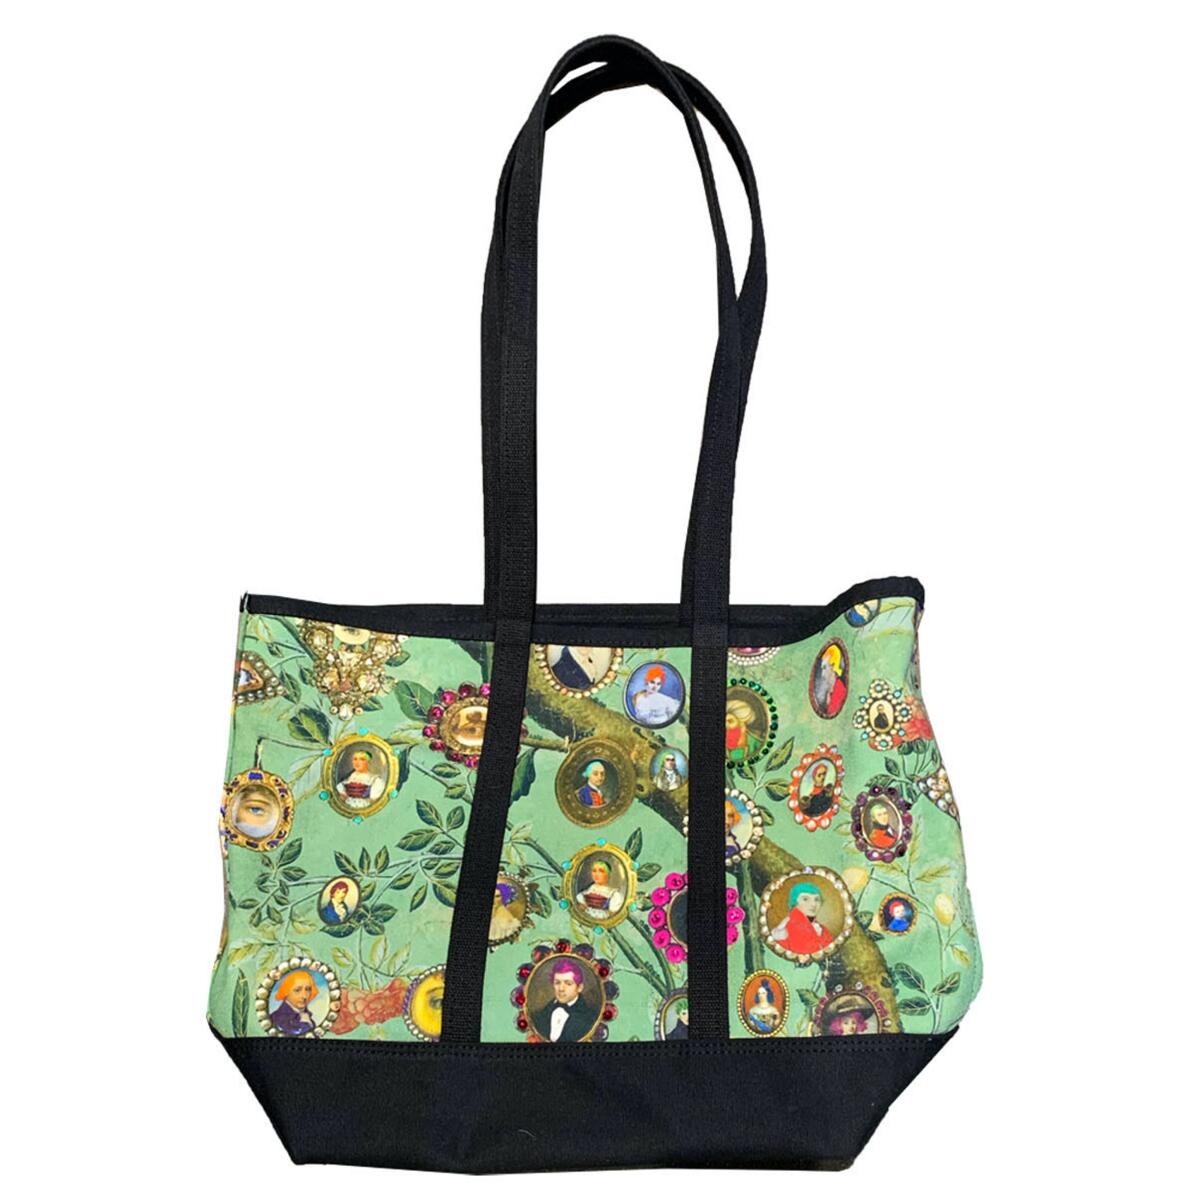 Libertine's Lover's Eyes canvas tote bag with crystals.